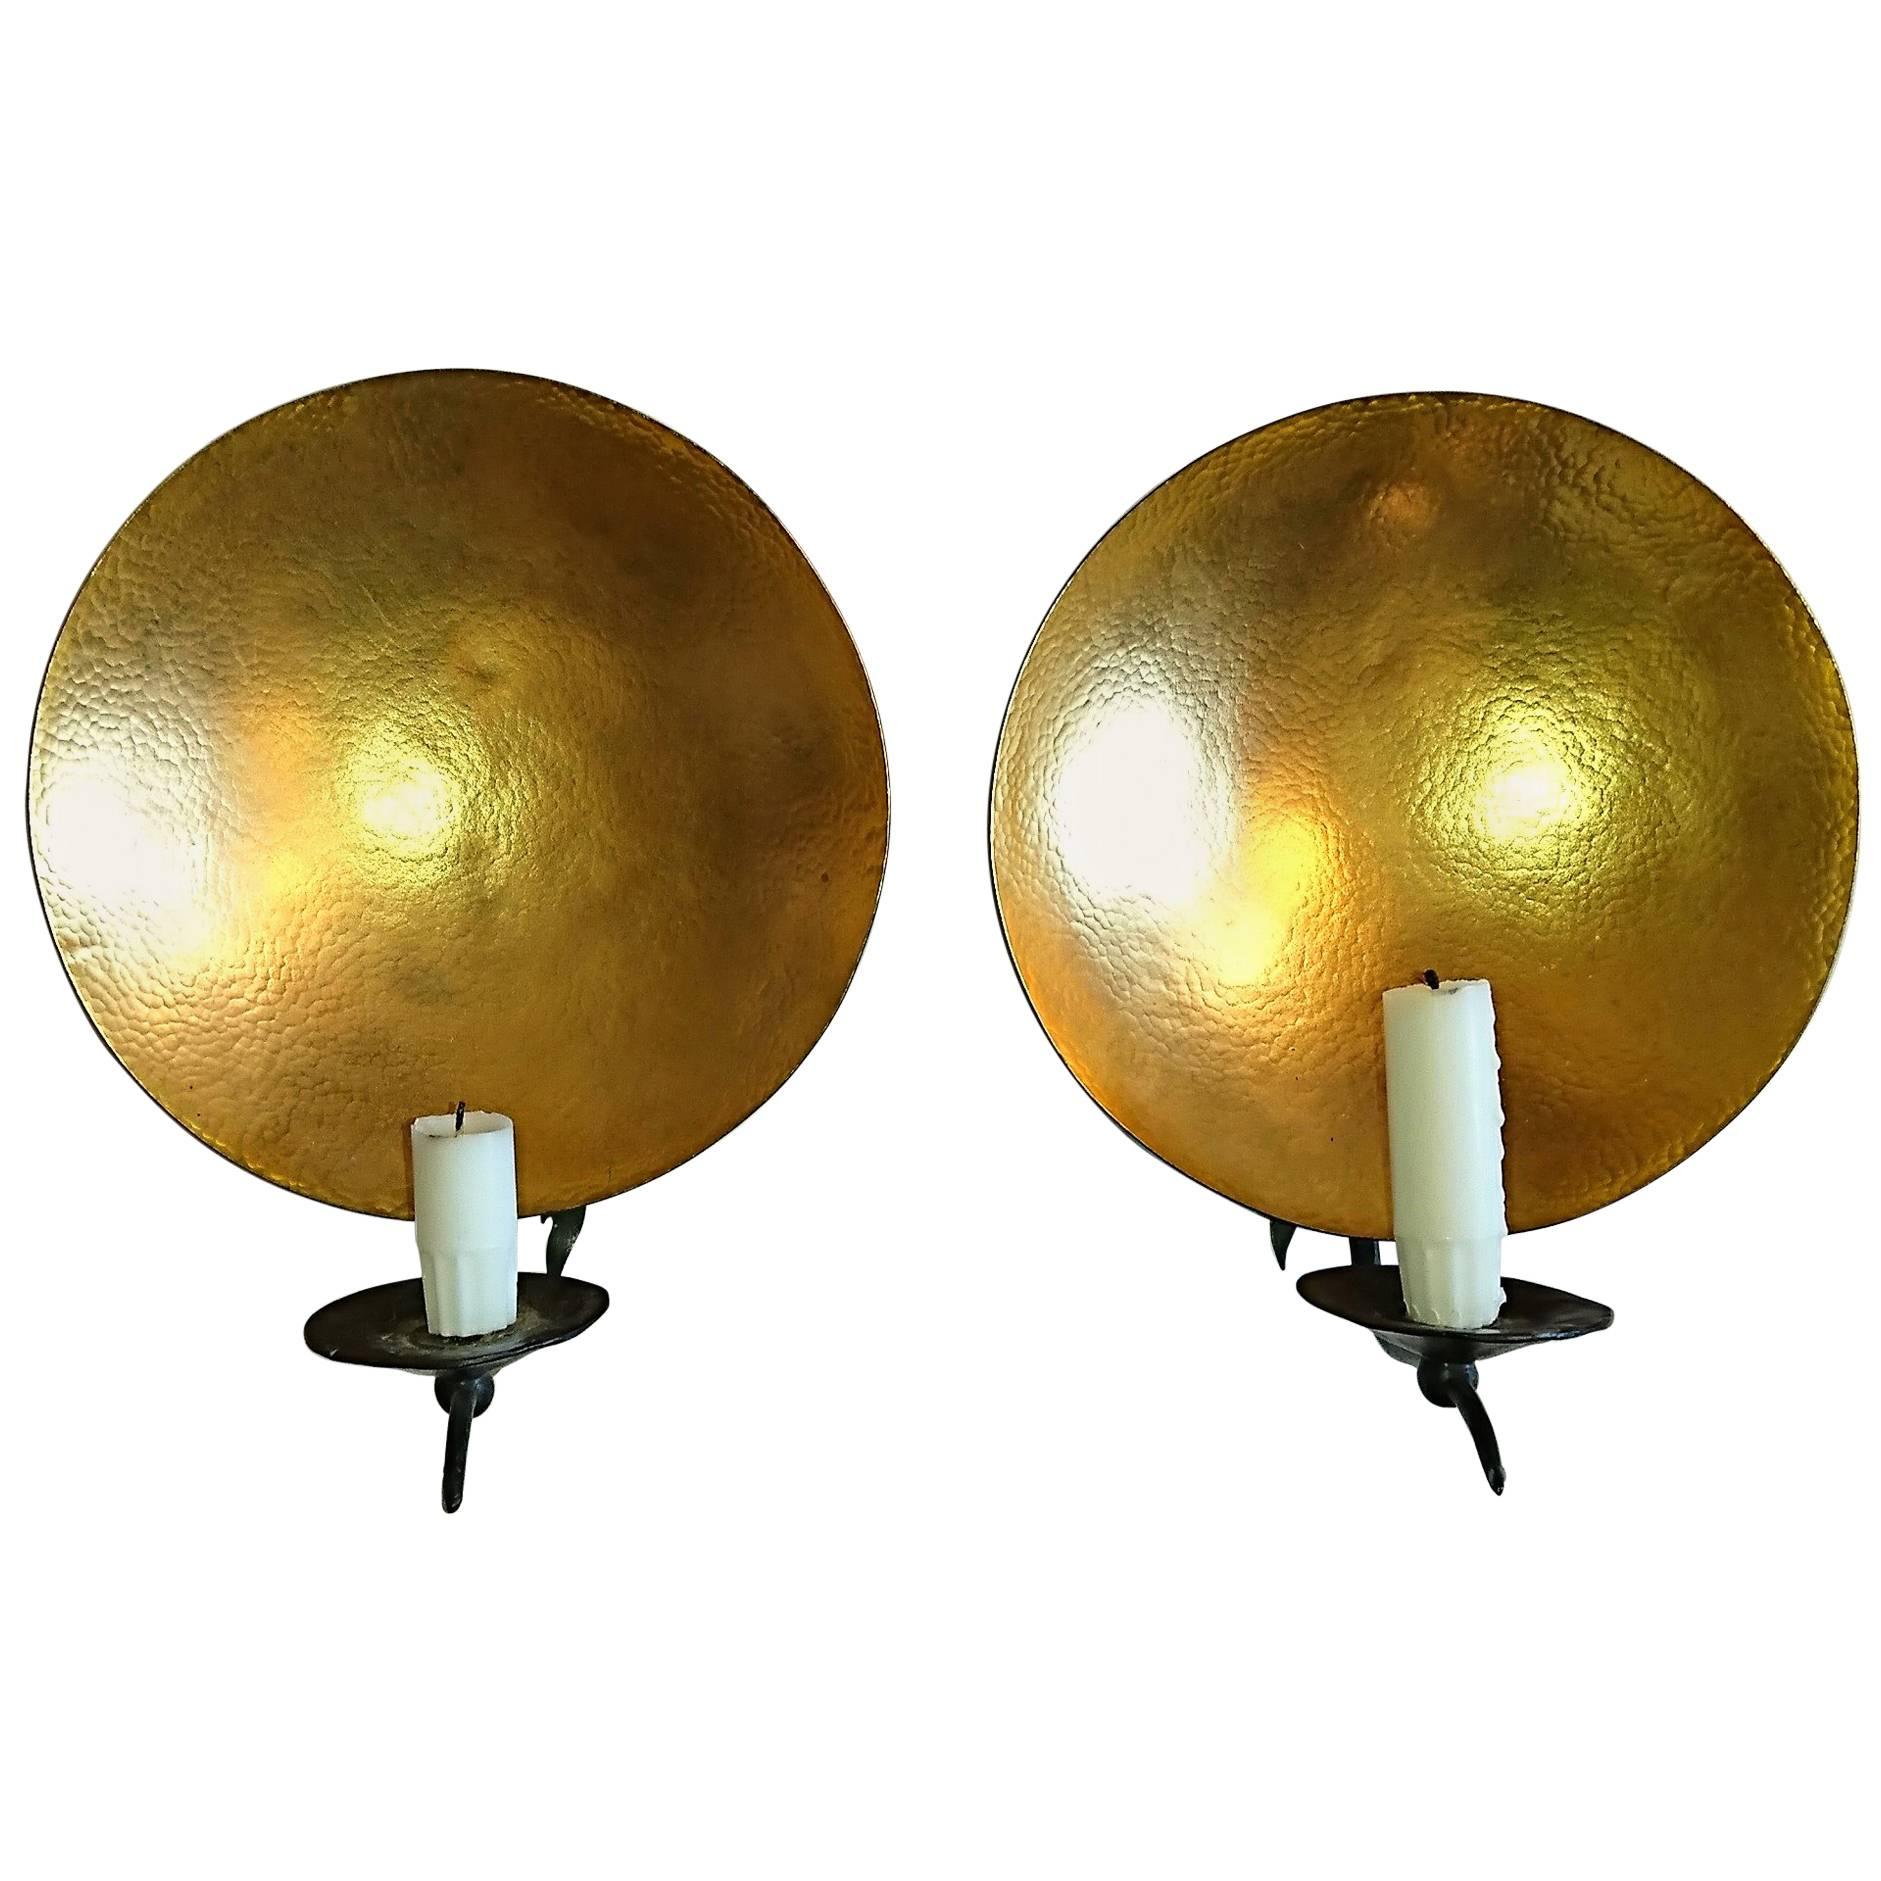 Pair of Wrought and Parcel-Gilt Iron Wall Sconces by Hervé Van Der Straeten For Sale